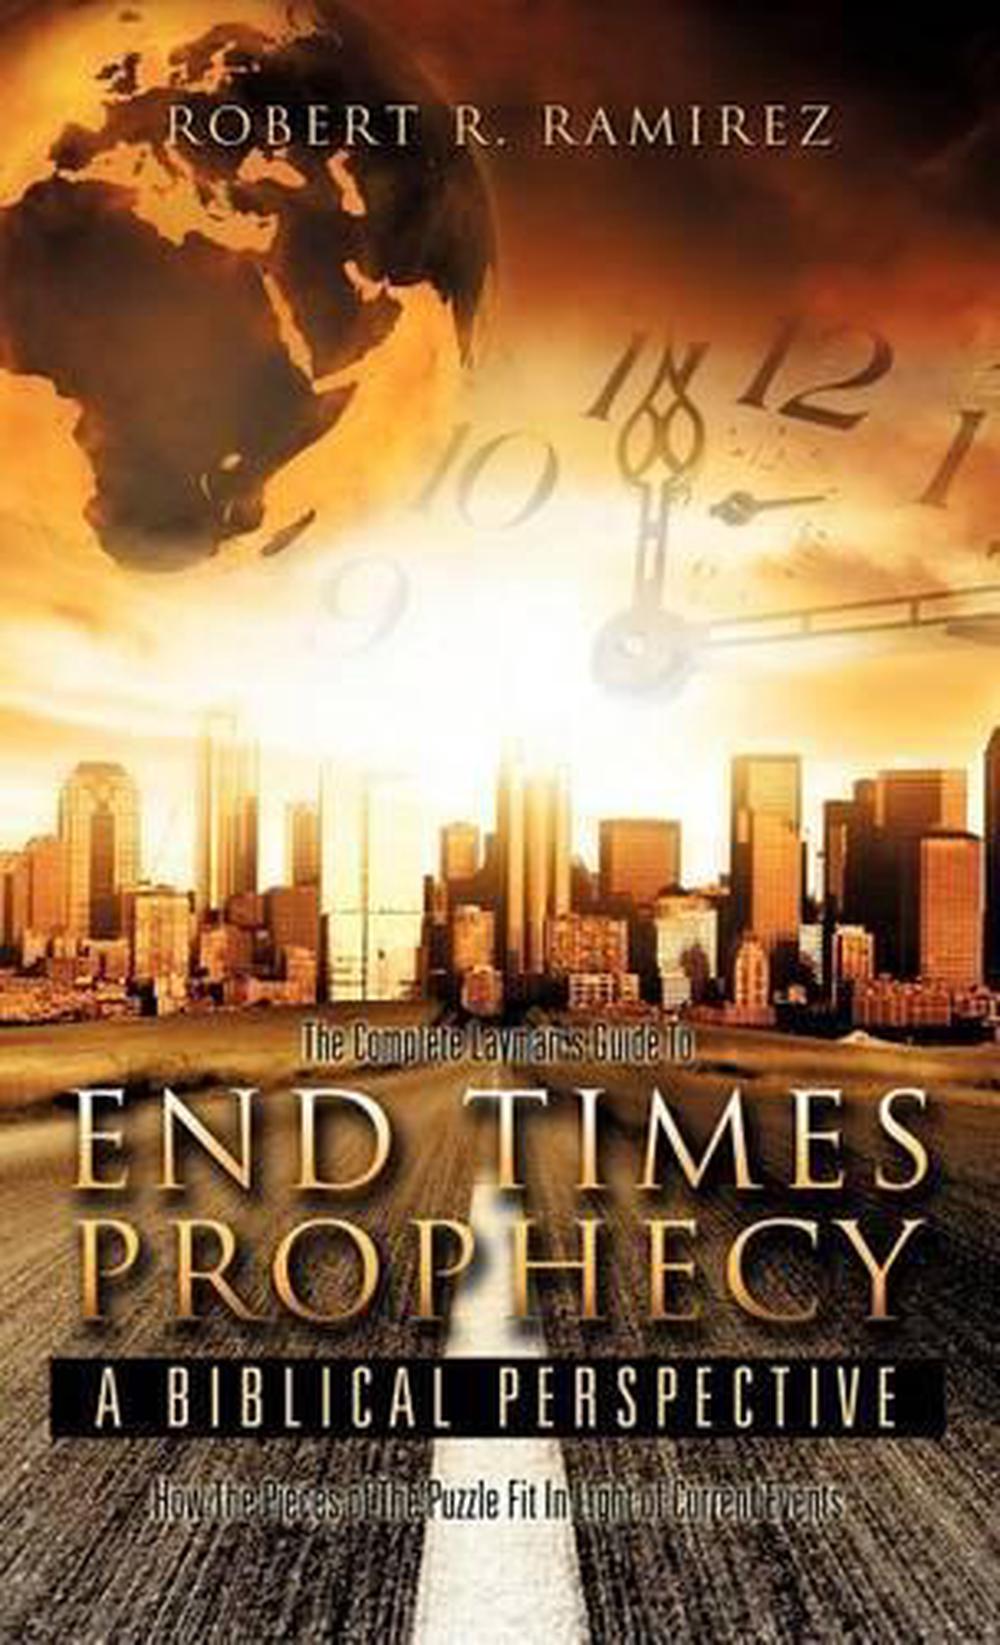 end times prophecy bible